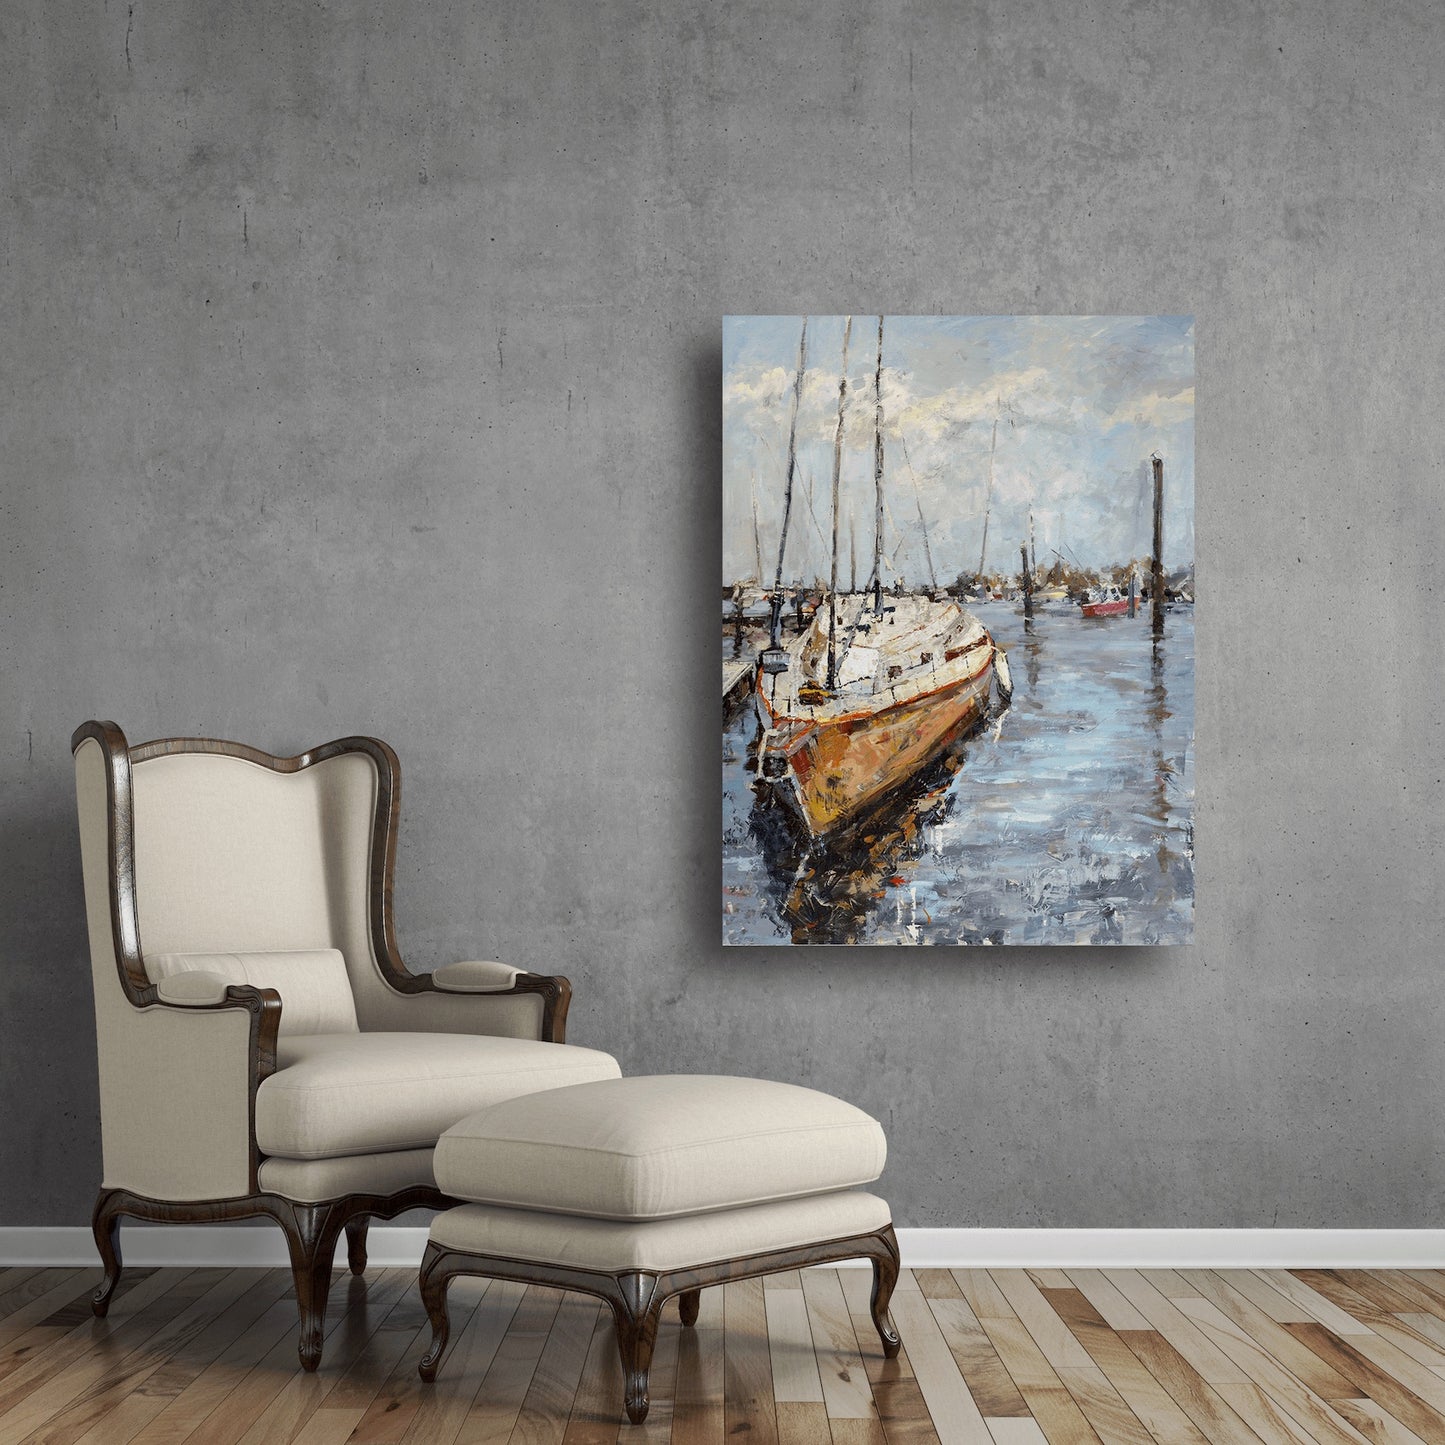 Let Go and Sail Glossy Poster Print